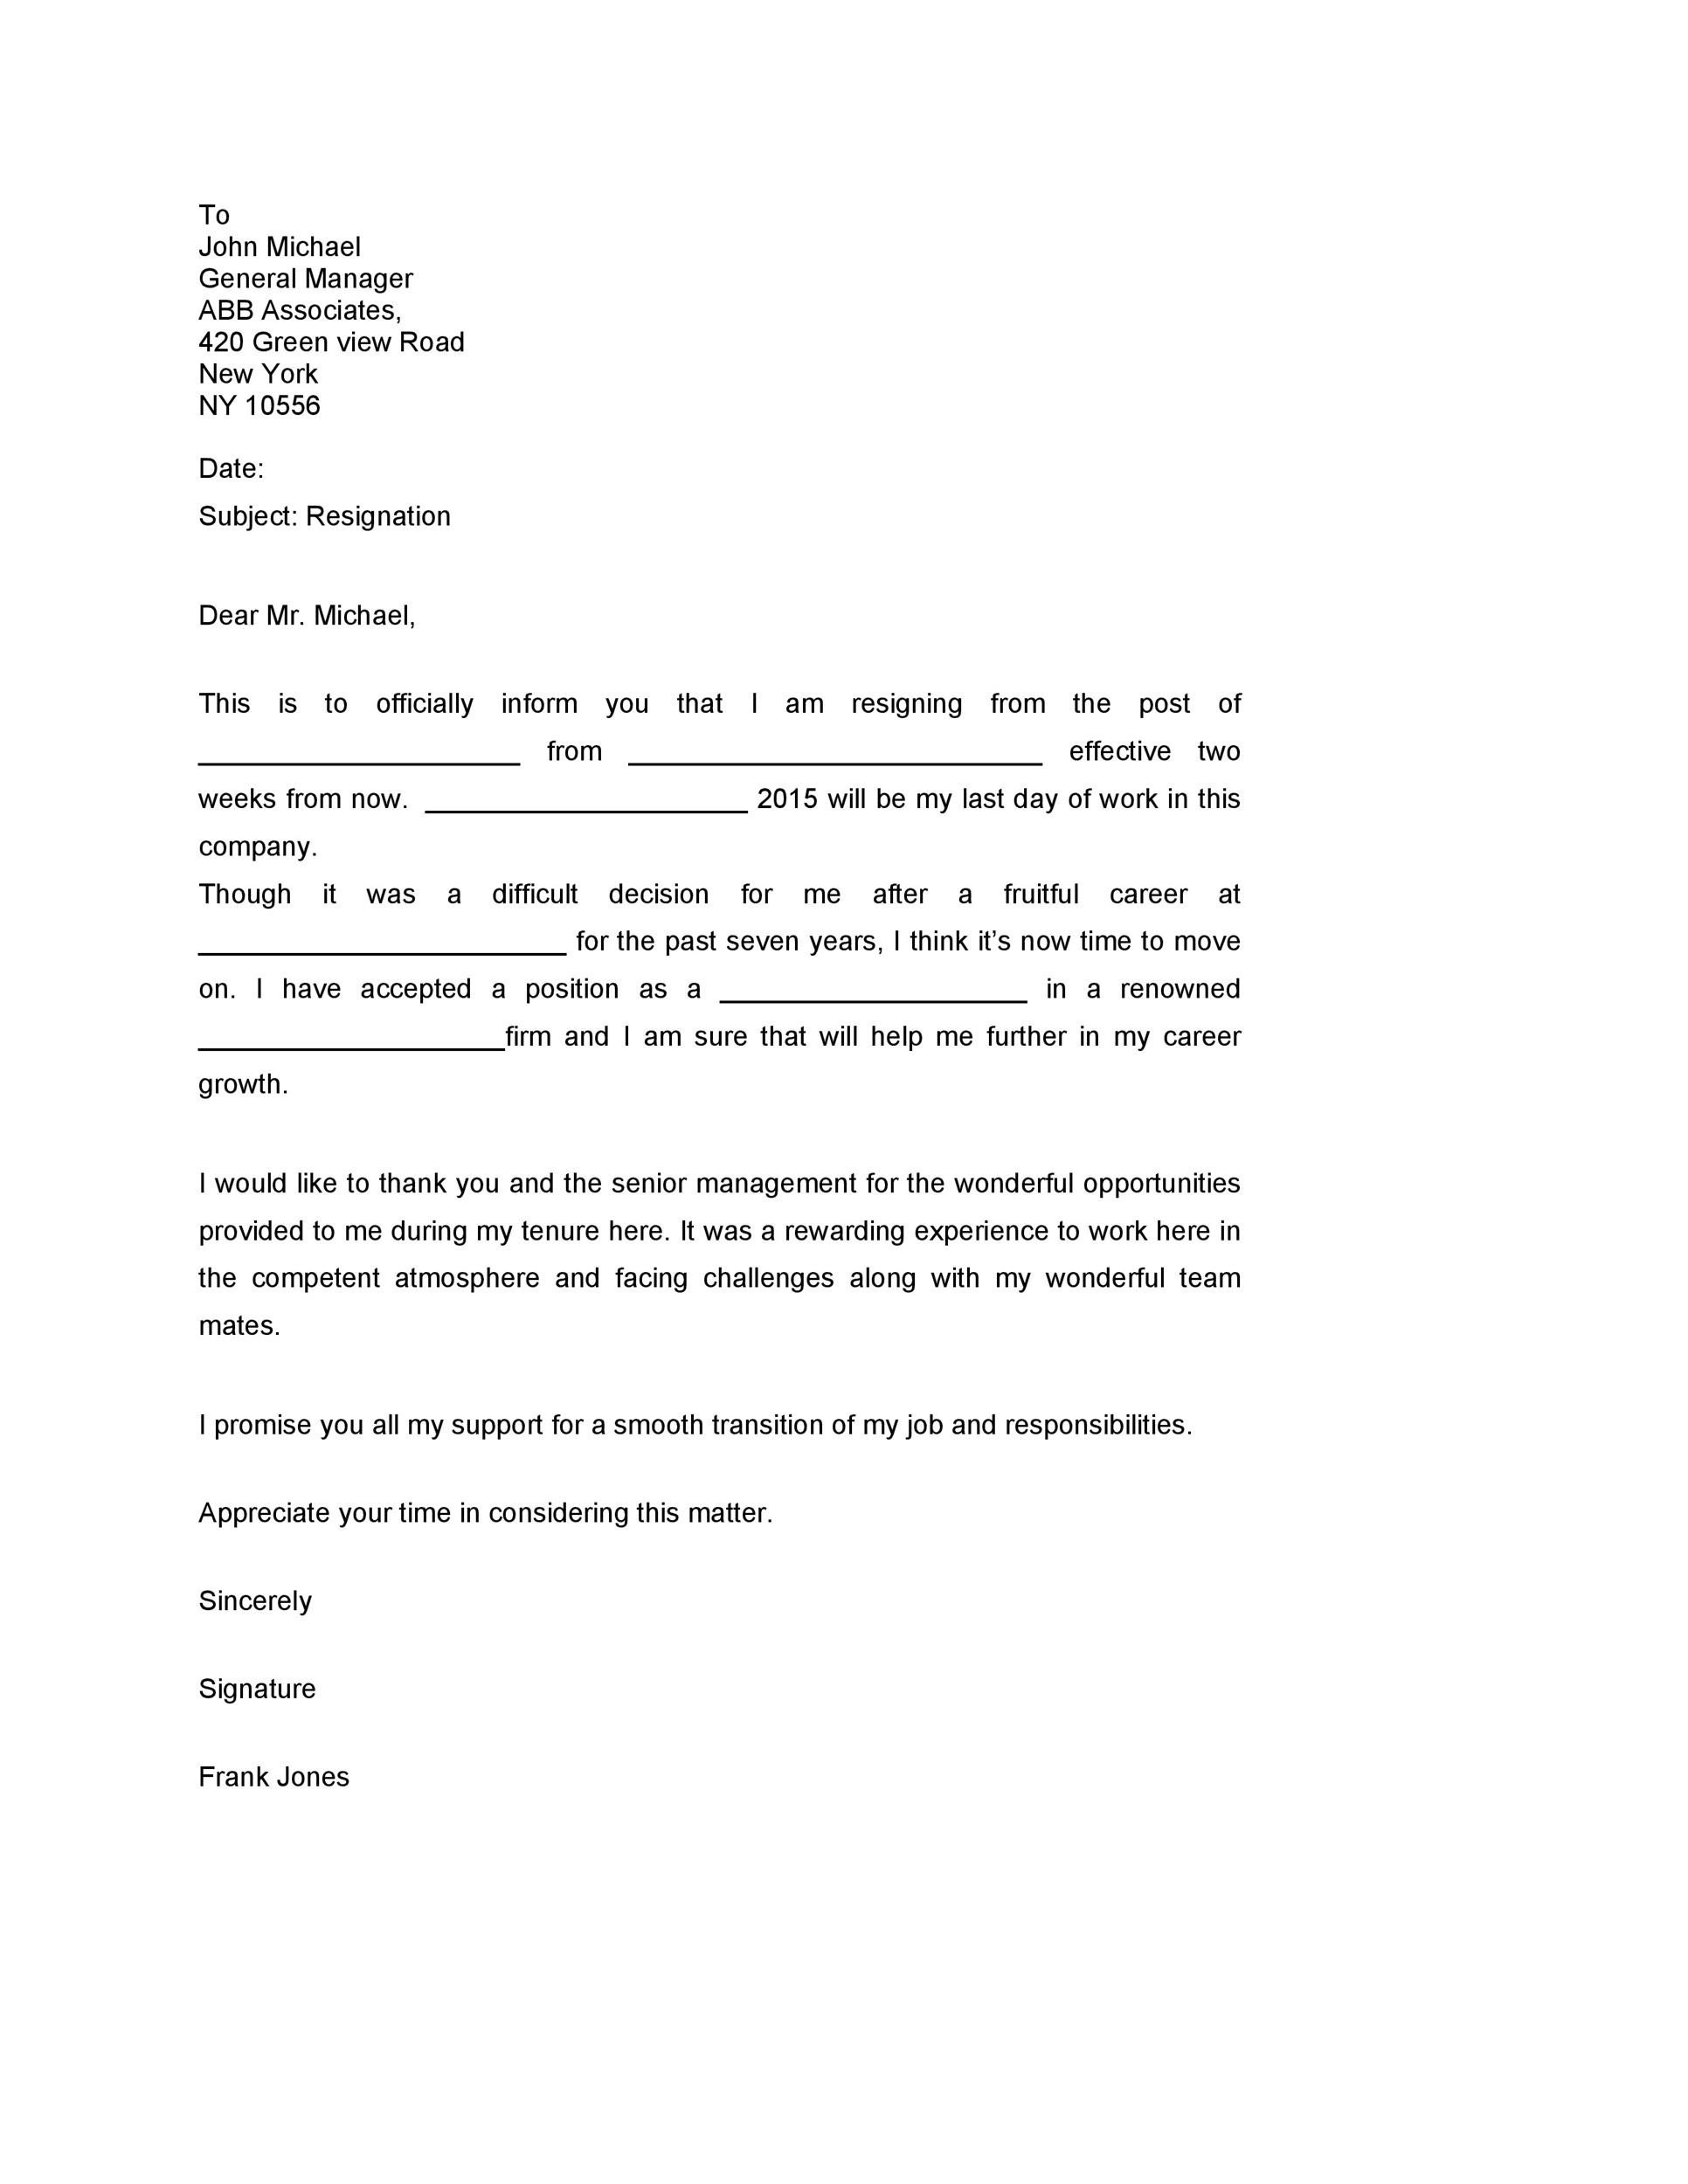 2 Week Resignation Letter Template from templatelab.com